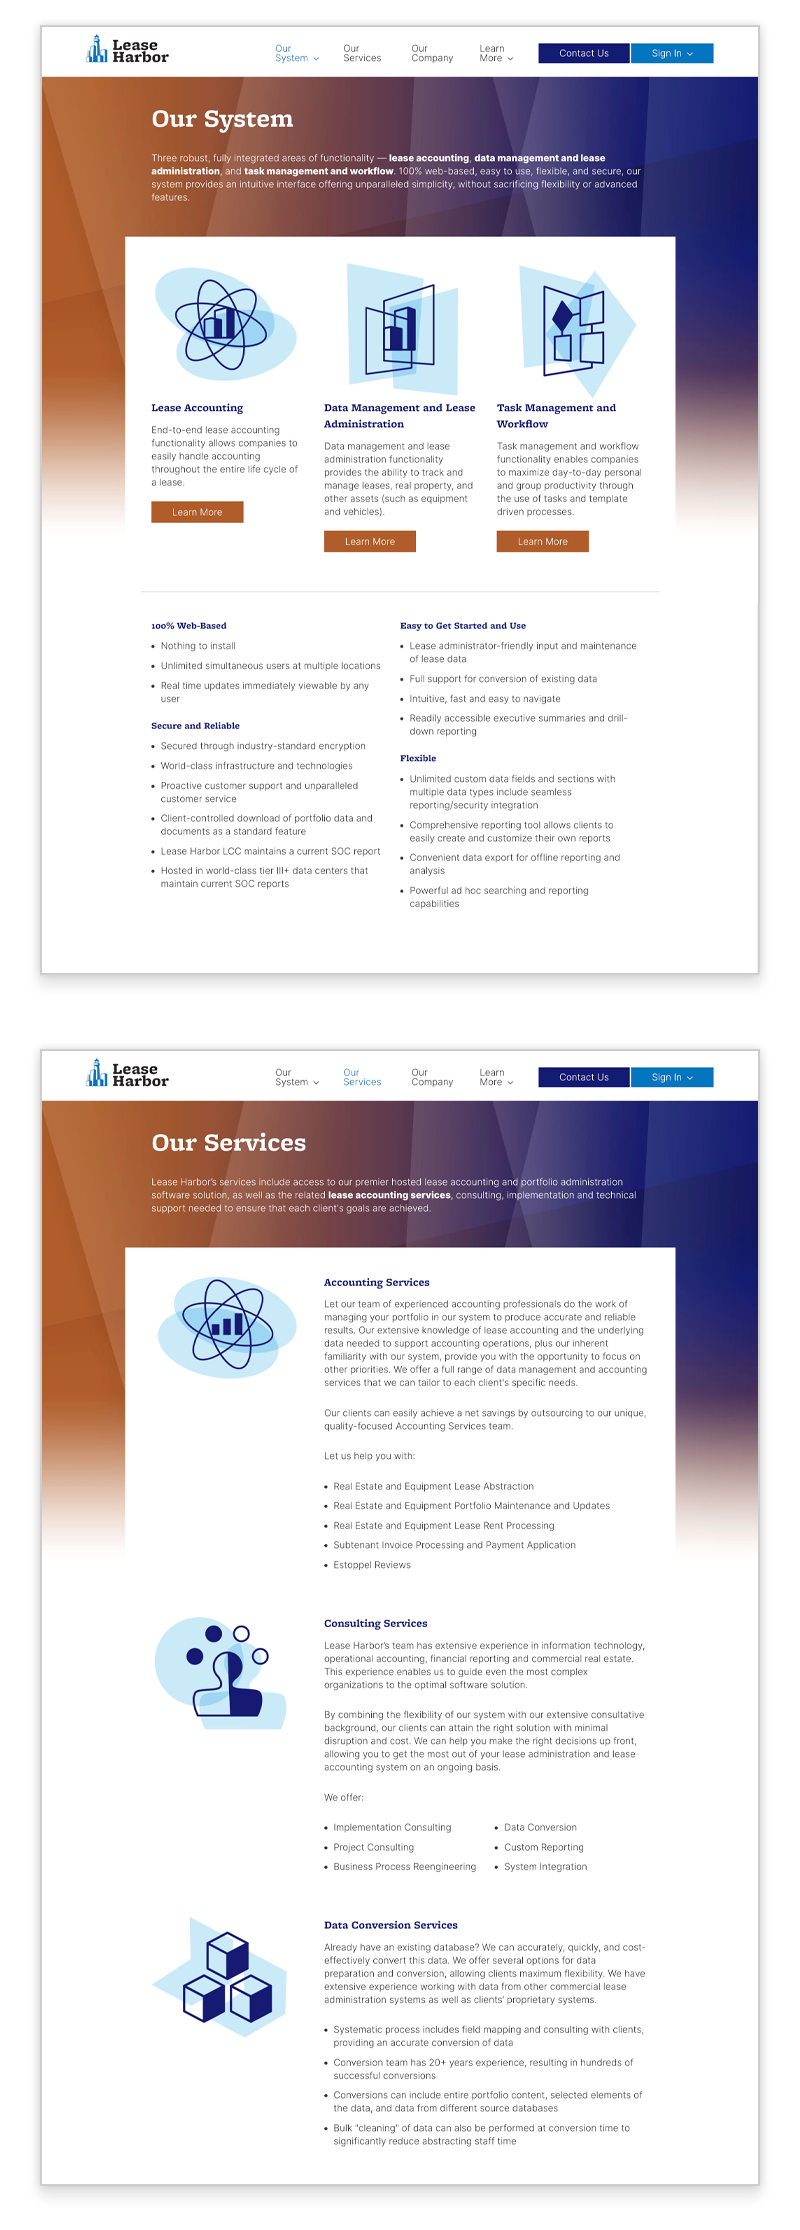 Lease Harbor Services Pages